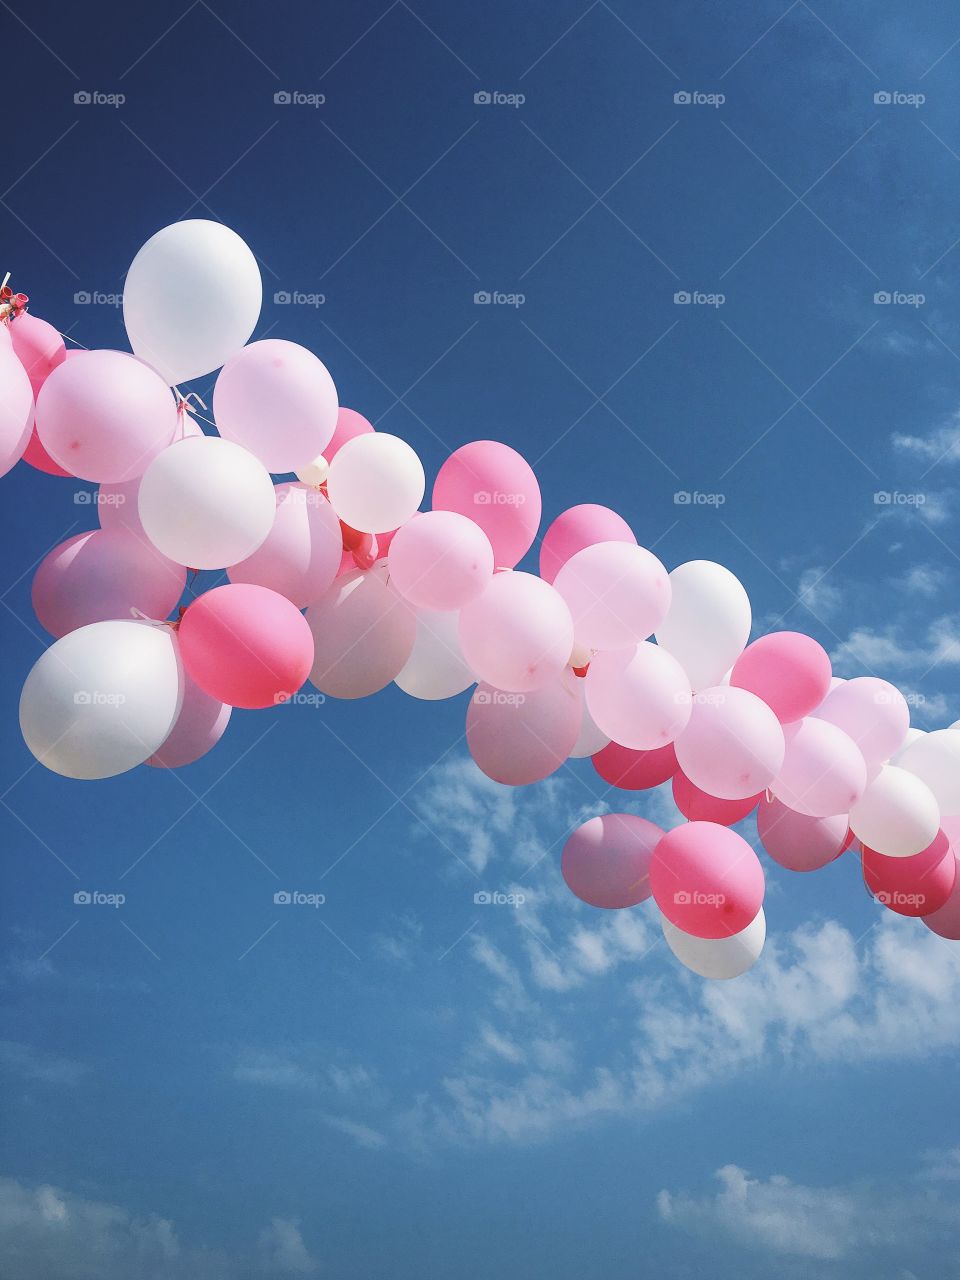 Pink balloons against blue sky